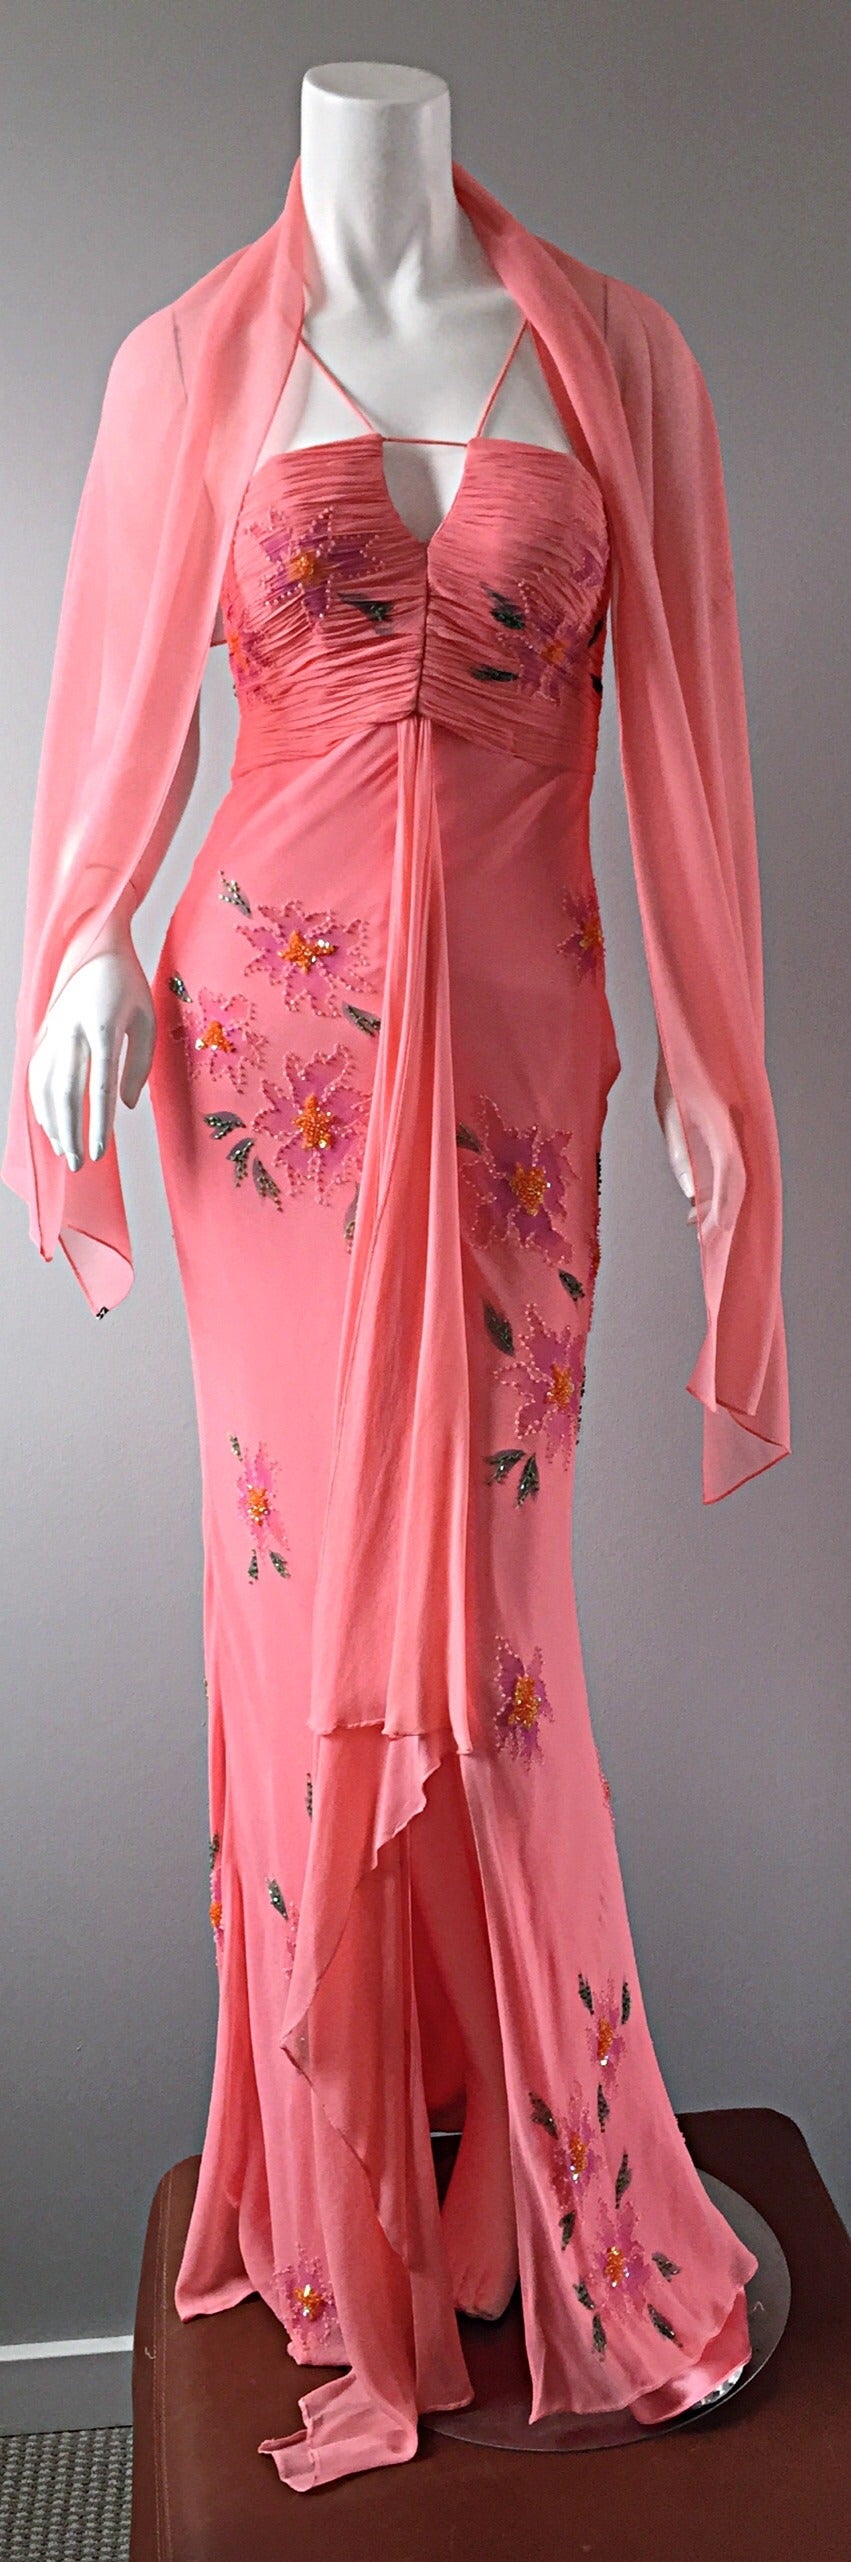 Stunning vintage Lillie Rubin silk chiffon pink gown and sash! Can be worn three different ways---with sash looped through neck straps, alone (without sash), or with sash draped over the shoulders. Asymmetrical hem, with layers and layers of